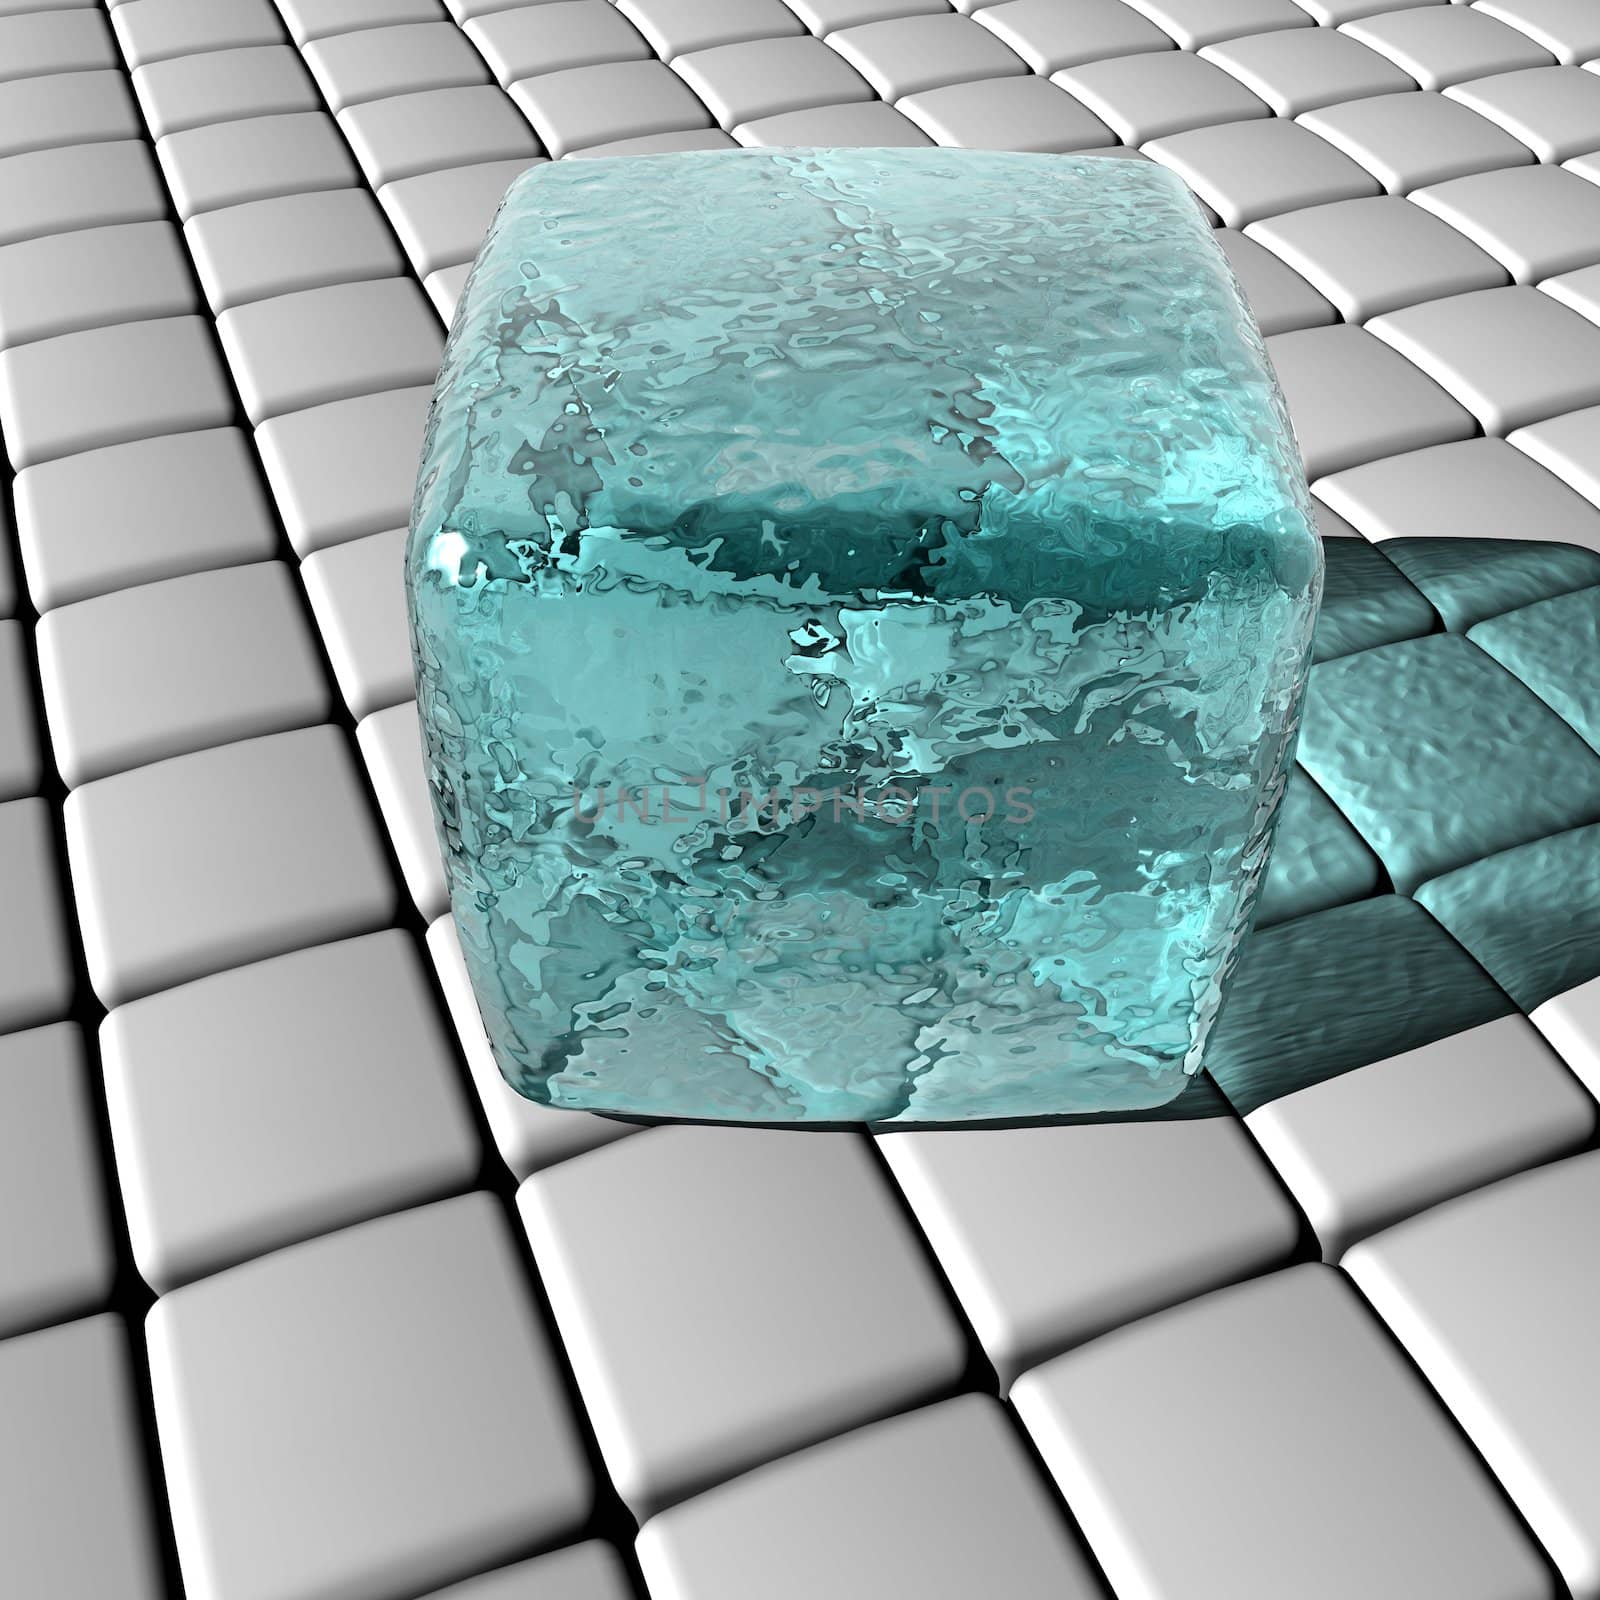 An illustration of a block of ice on a 3D grid.